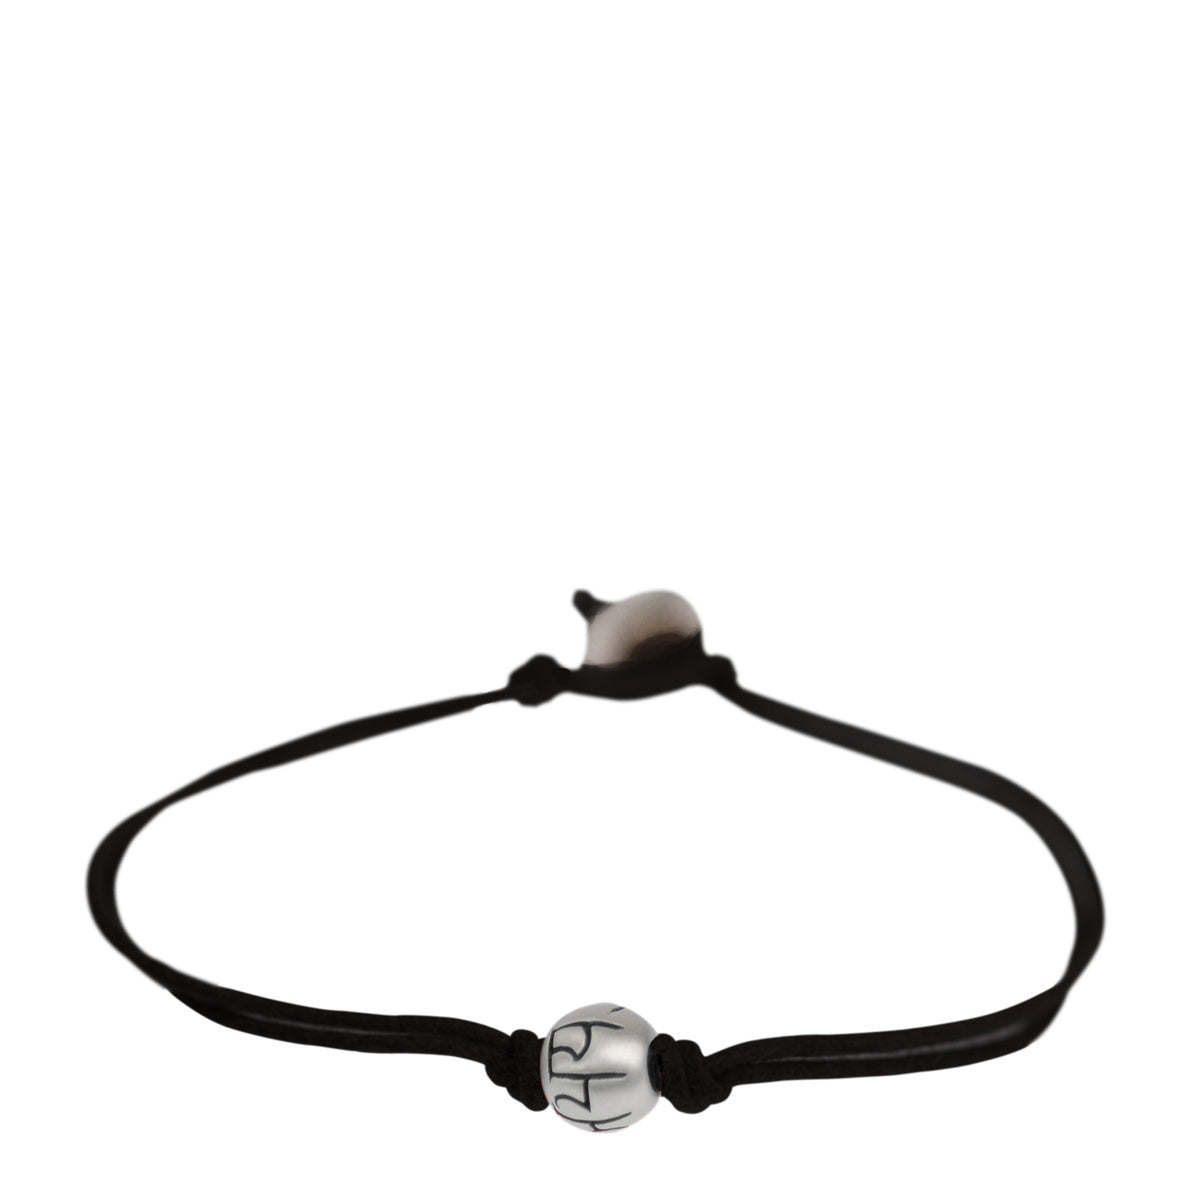 Sterling Silver Fearlessness Bead Bracelet on Black Cord with Button Closure